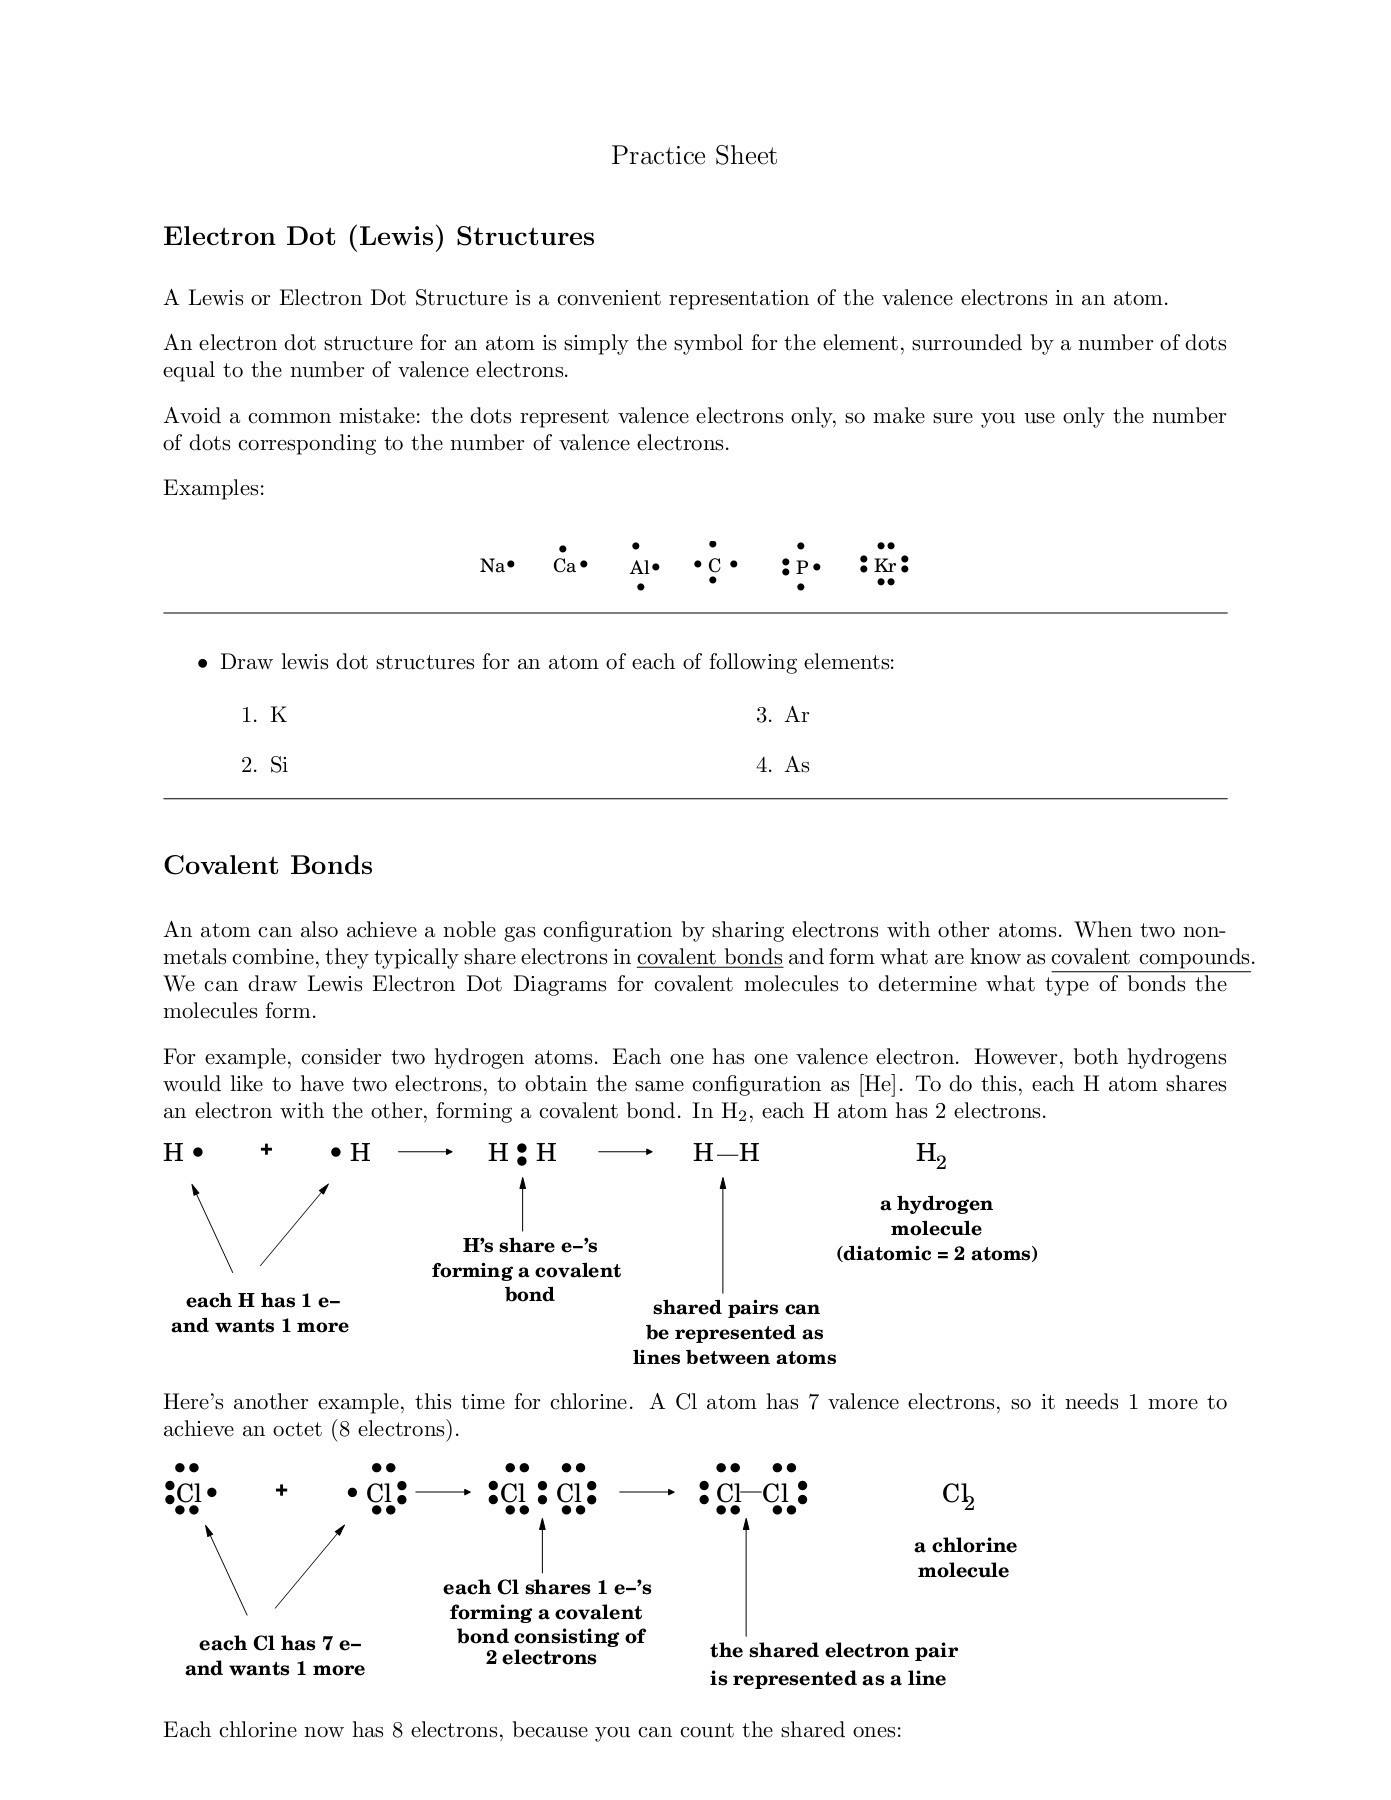 Lewis Dot Diagrams Worksheet Answers Electron Dot Lewis Structures Pages 1 4 Text Version